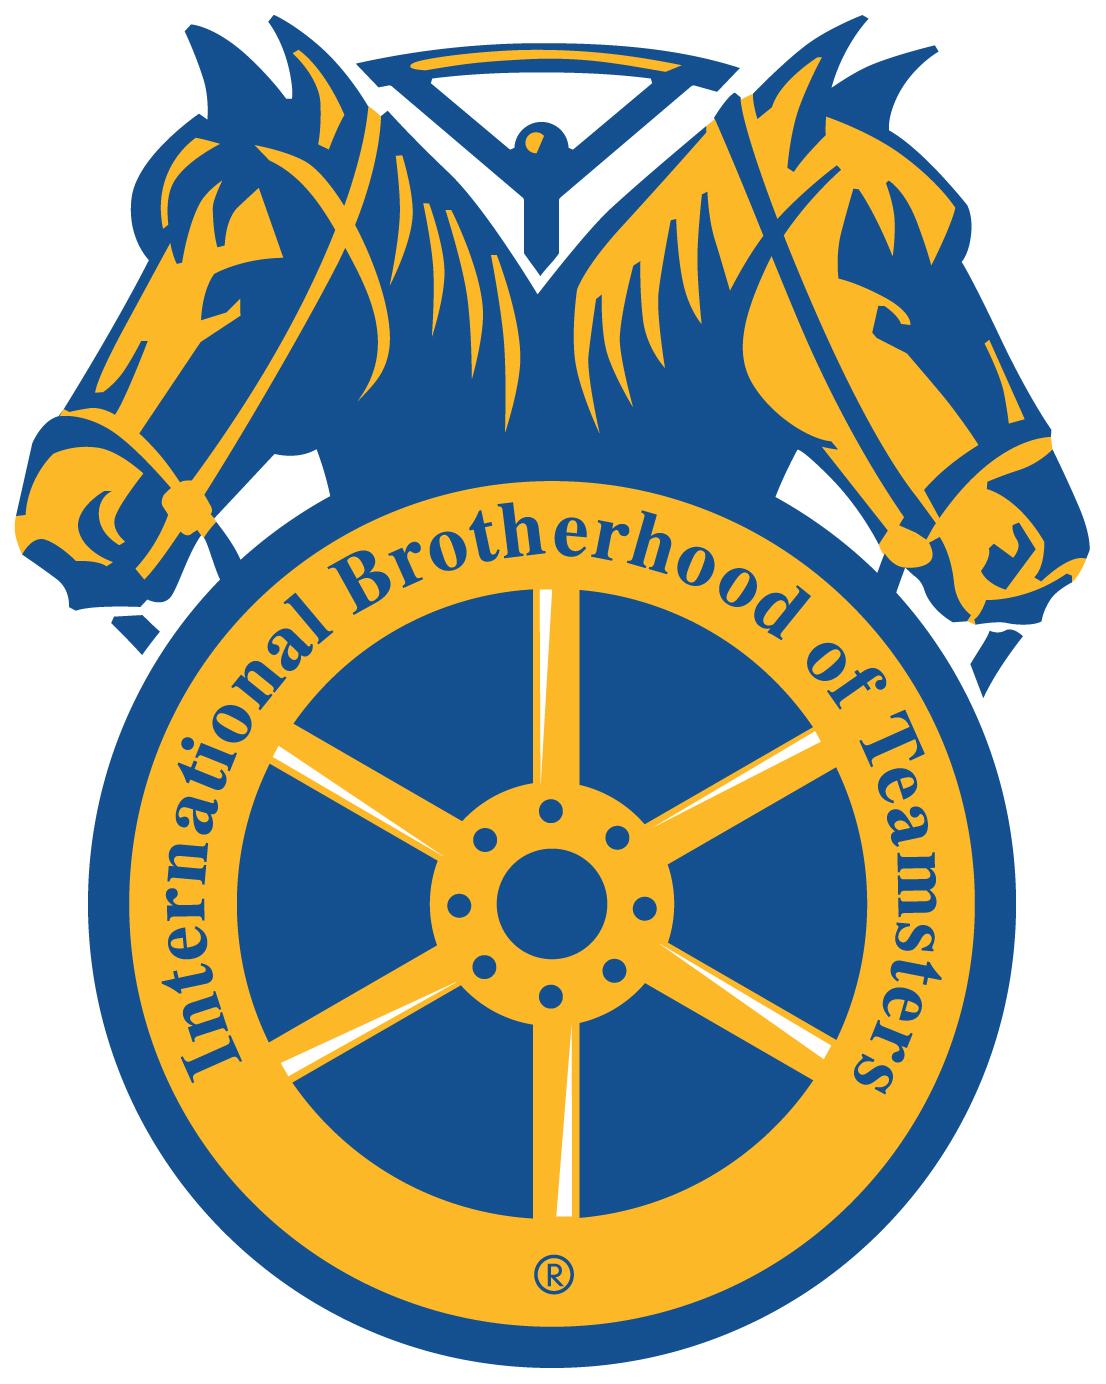 The Teamster Union Pushes for Commercial Truck Exemptions in Driverless Vehicle Legislation